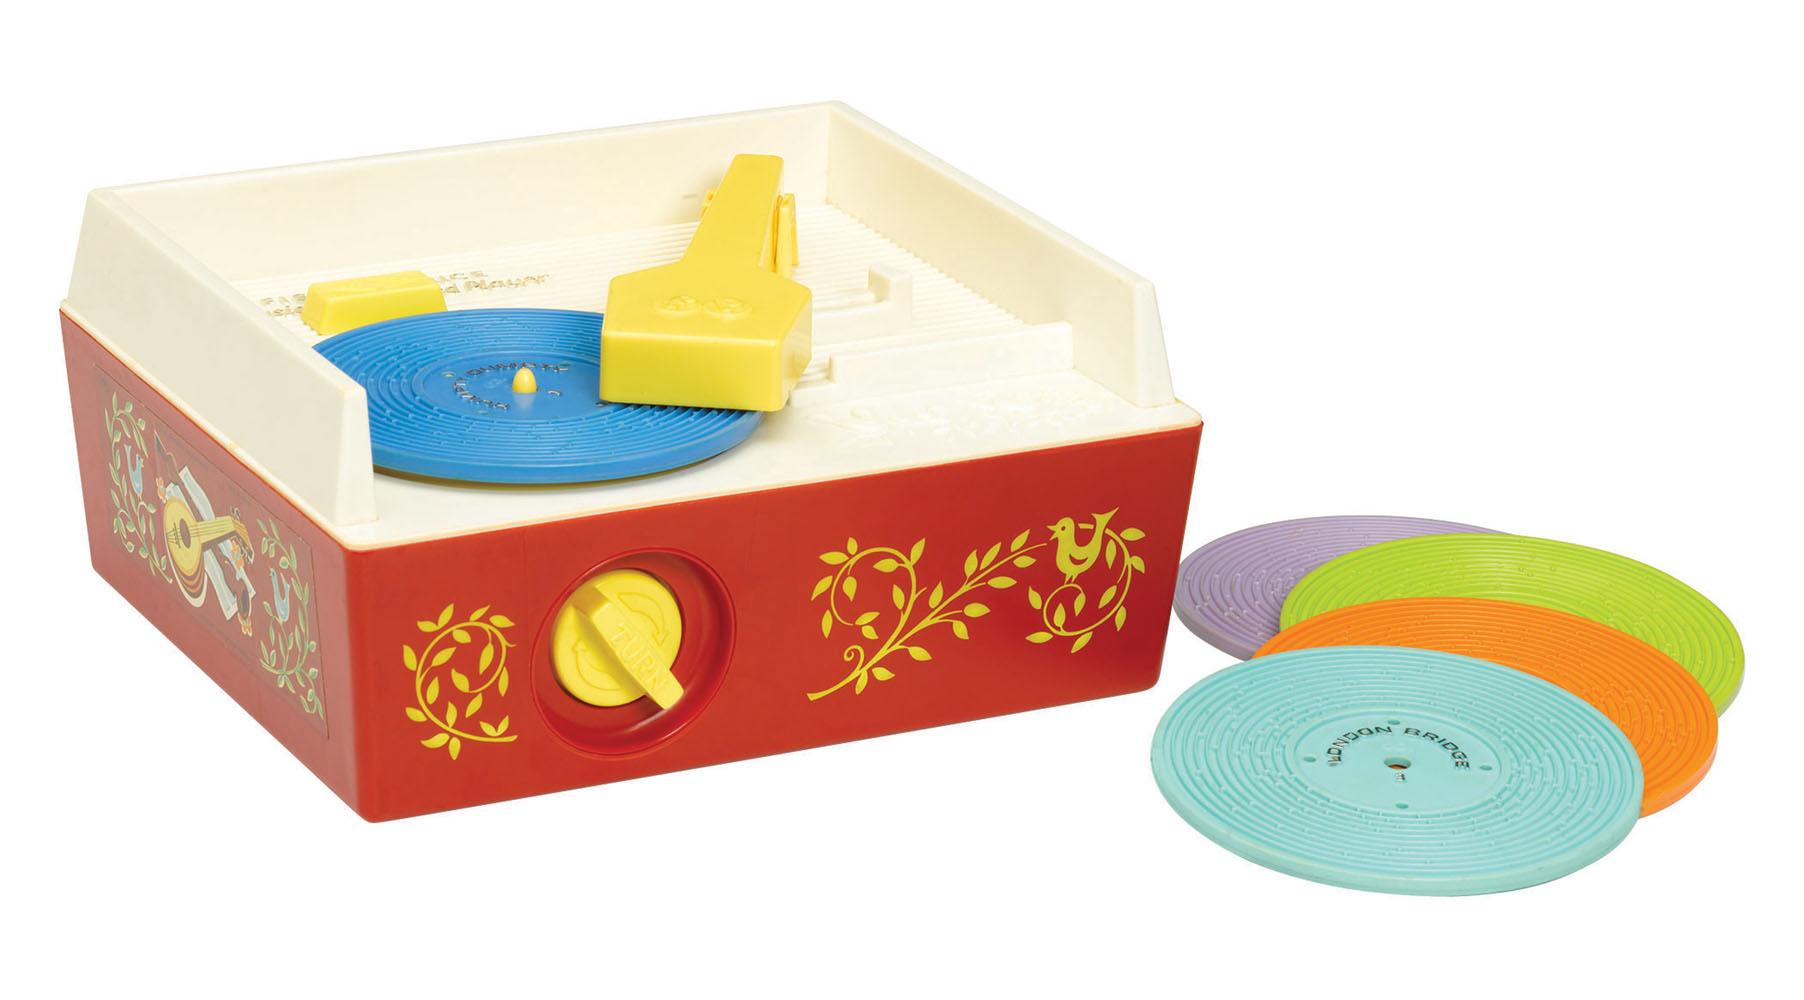 Retro Toys Quiz 🎠: Can You Identify These 1970s Toys? Music Box Record Player